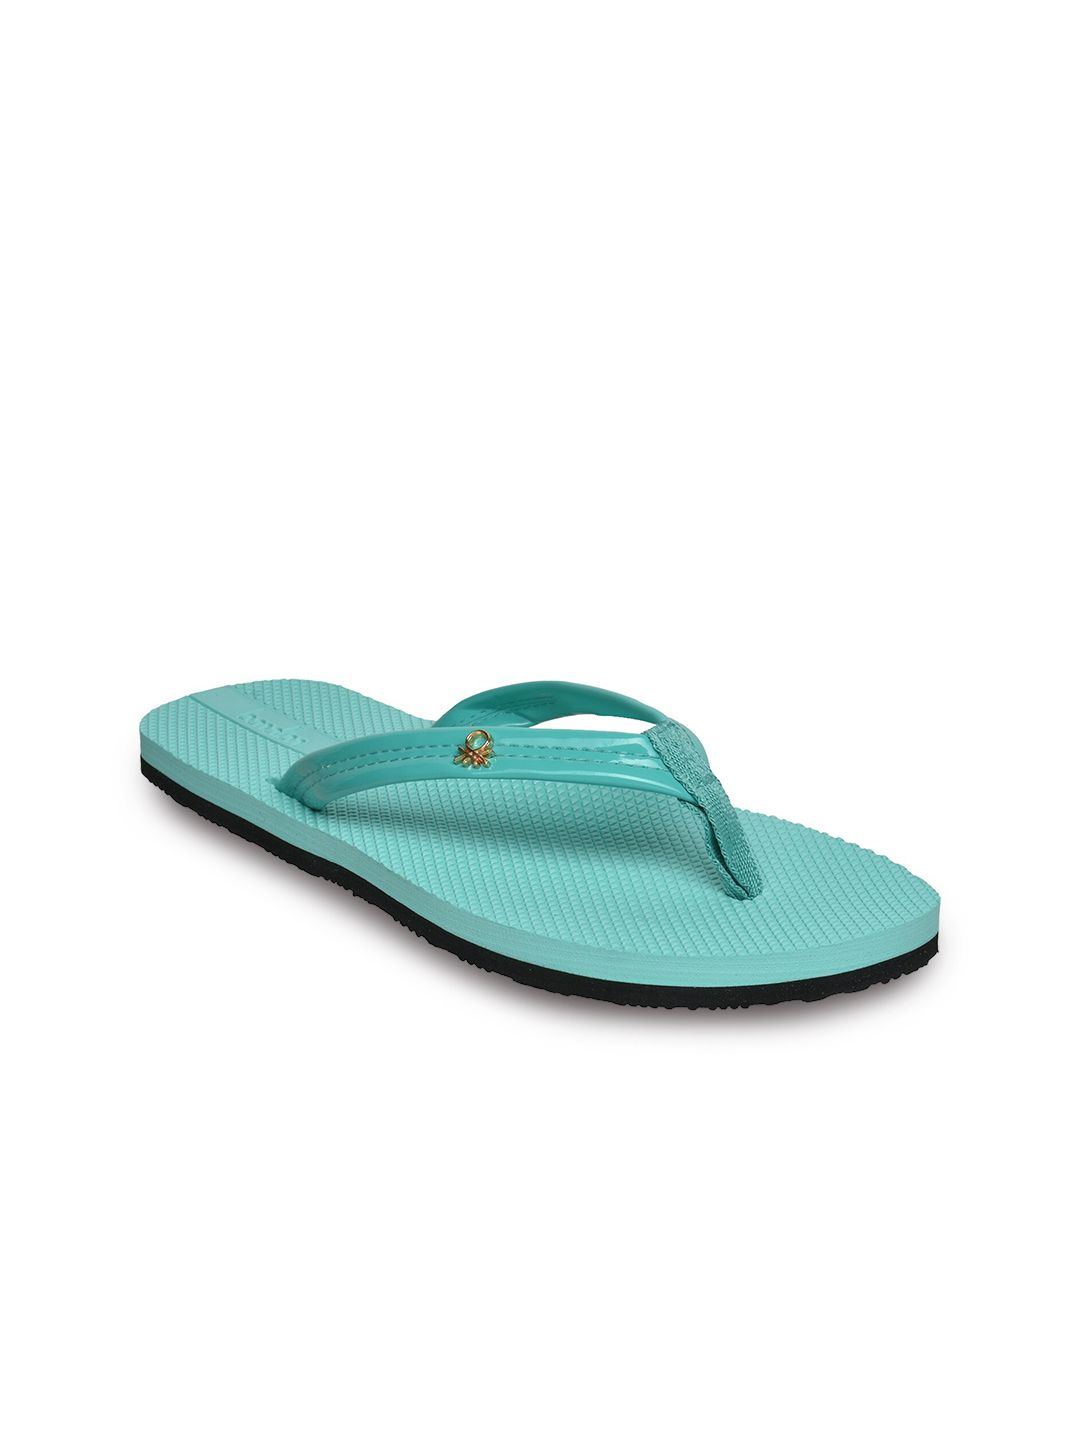 United Colors of Benetton Women Sea Green Thong Flip-Flops Price in India